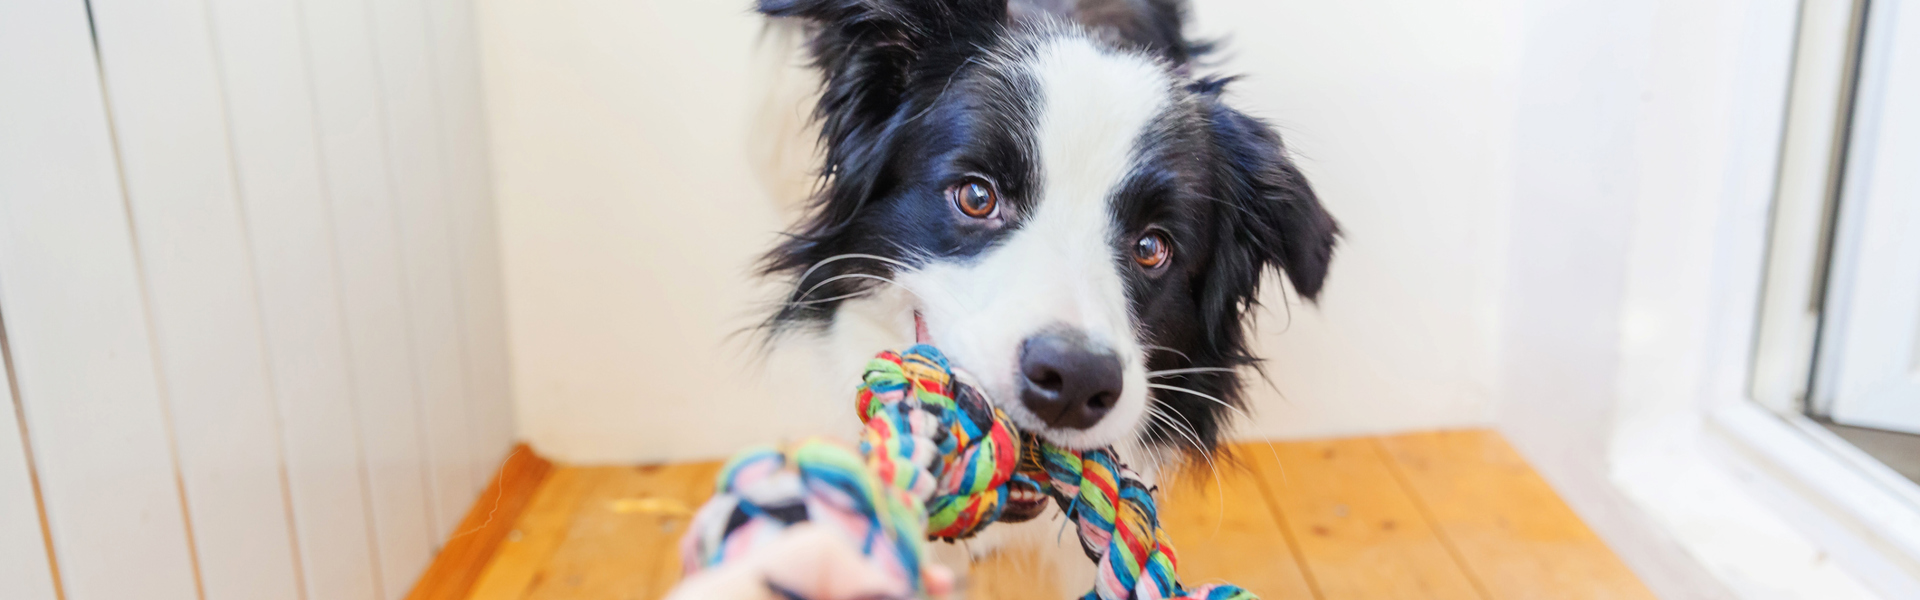 a black and white border collie dog chewing on a multicoloured pet toy